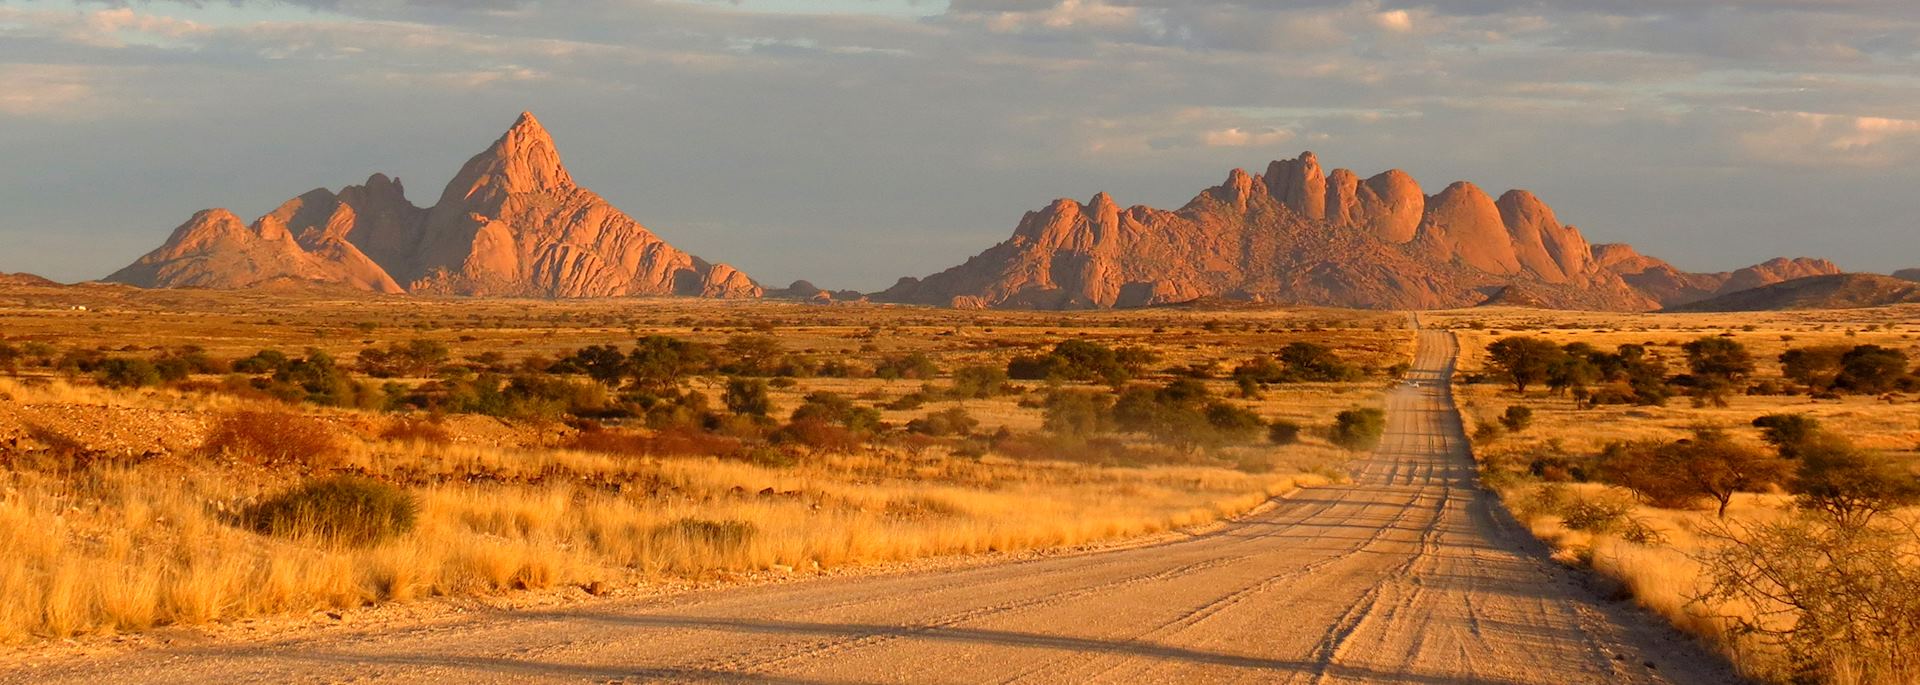 Driving in Spitzkoppe, Namibia